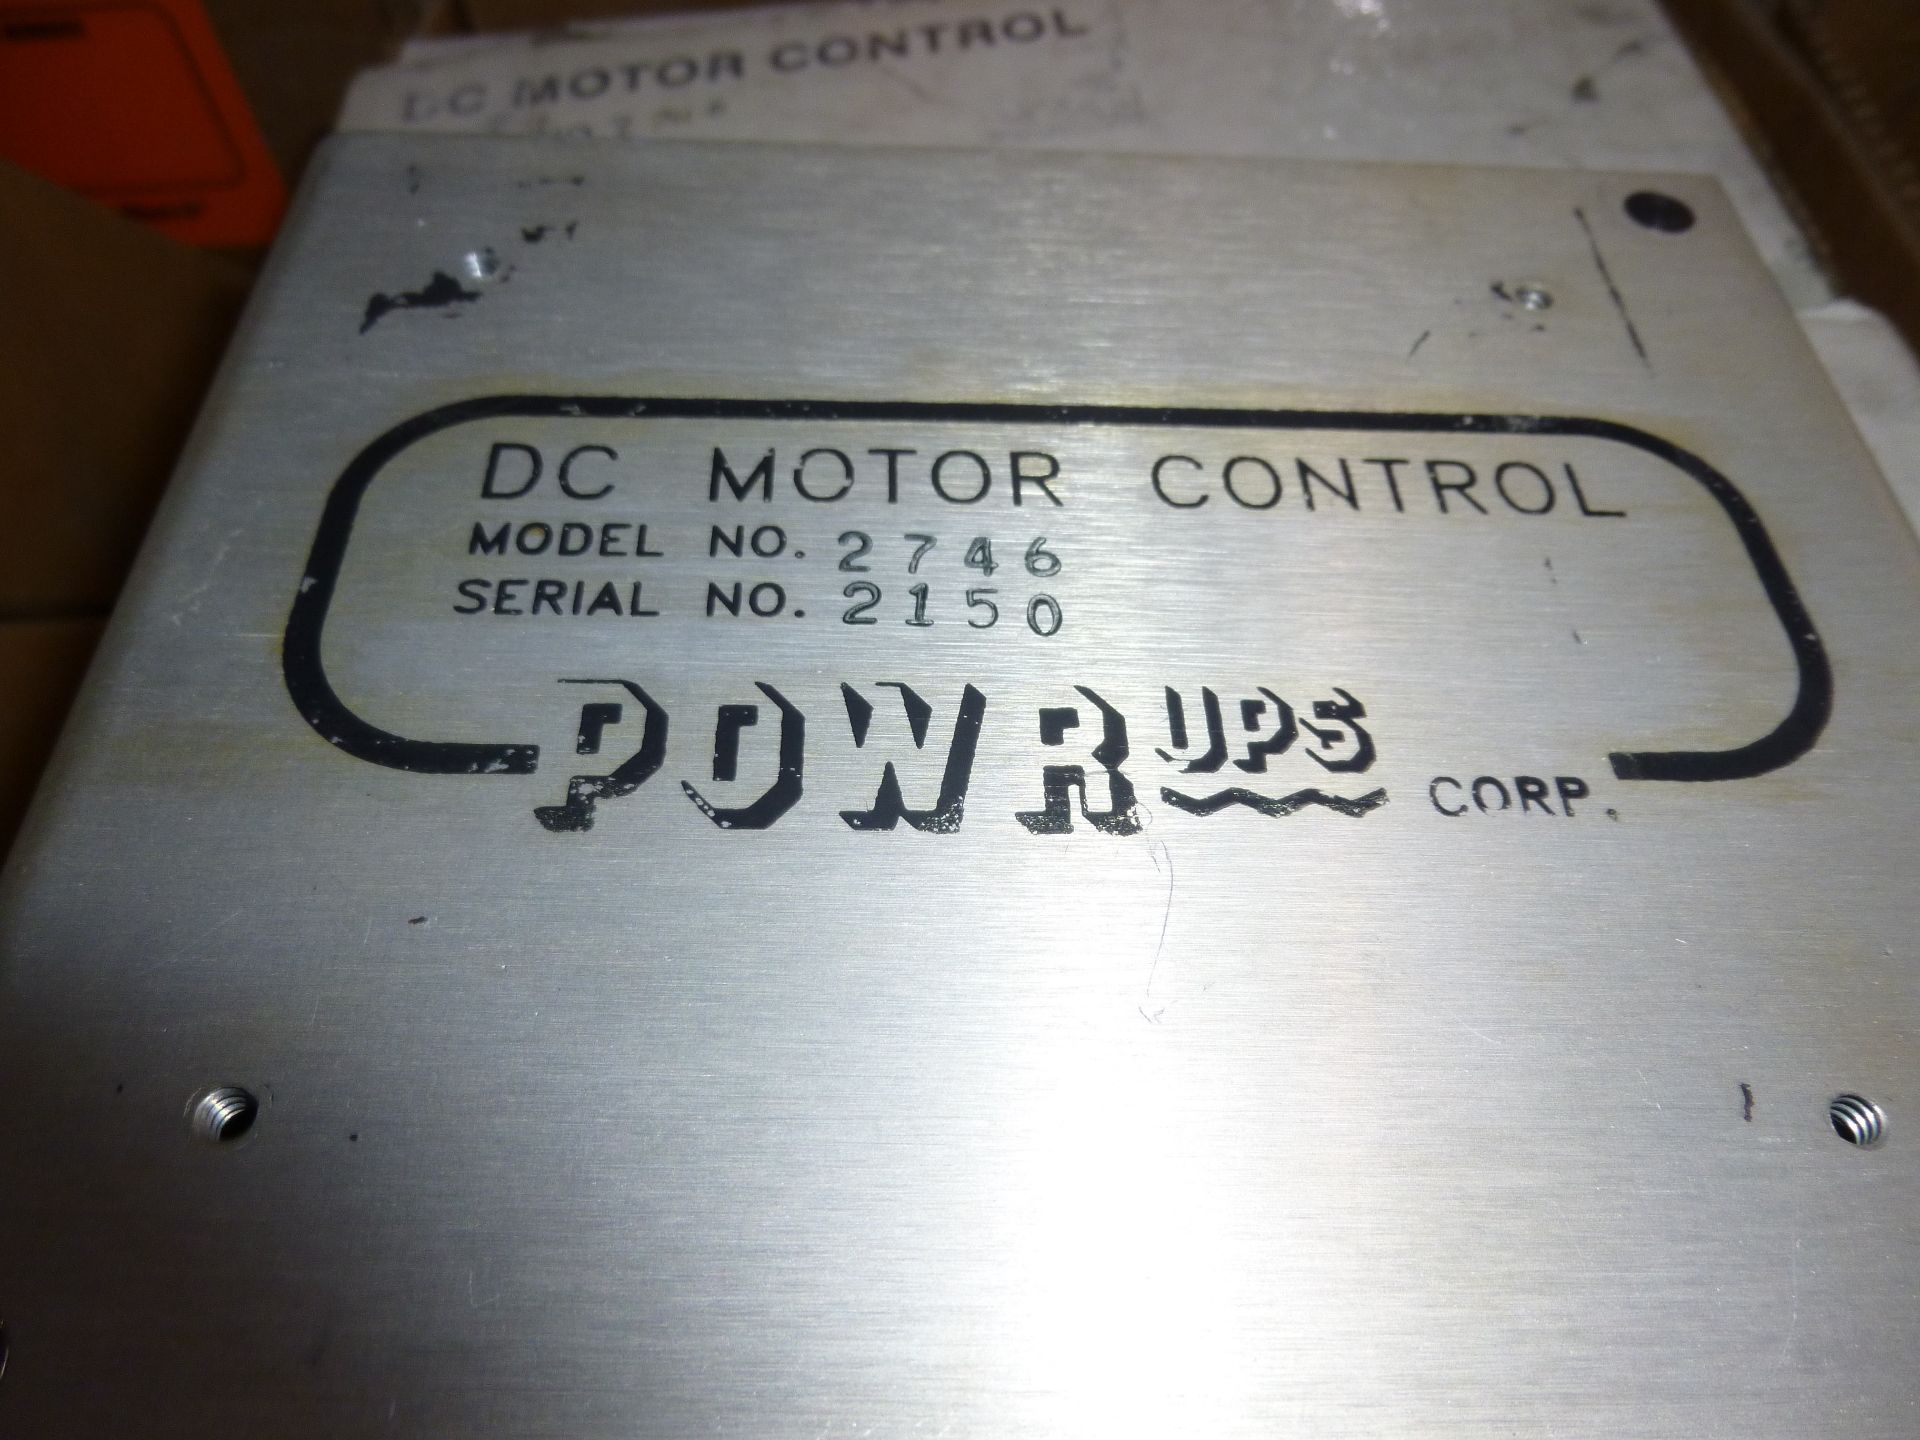 Qty 3 Powr UPS DC Motor Control Model 2746, as always with Brolyn LLC auctions, all lots can be - Image 2 of 2